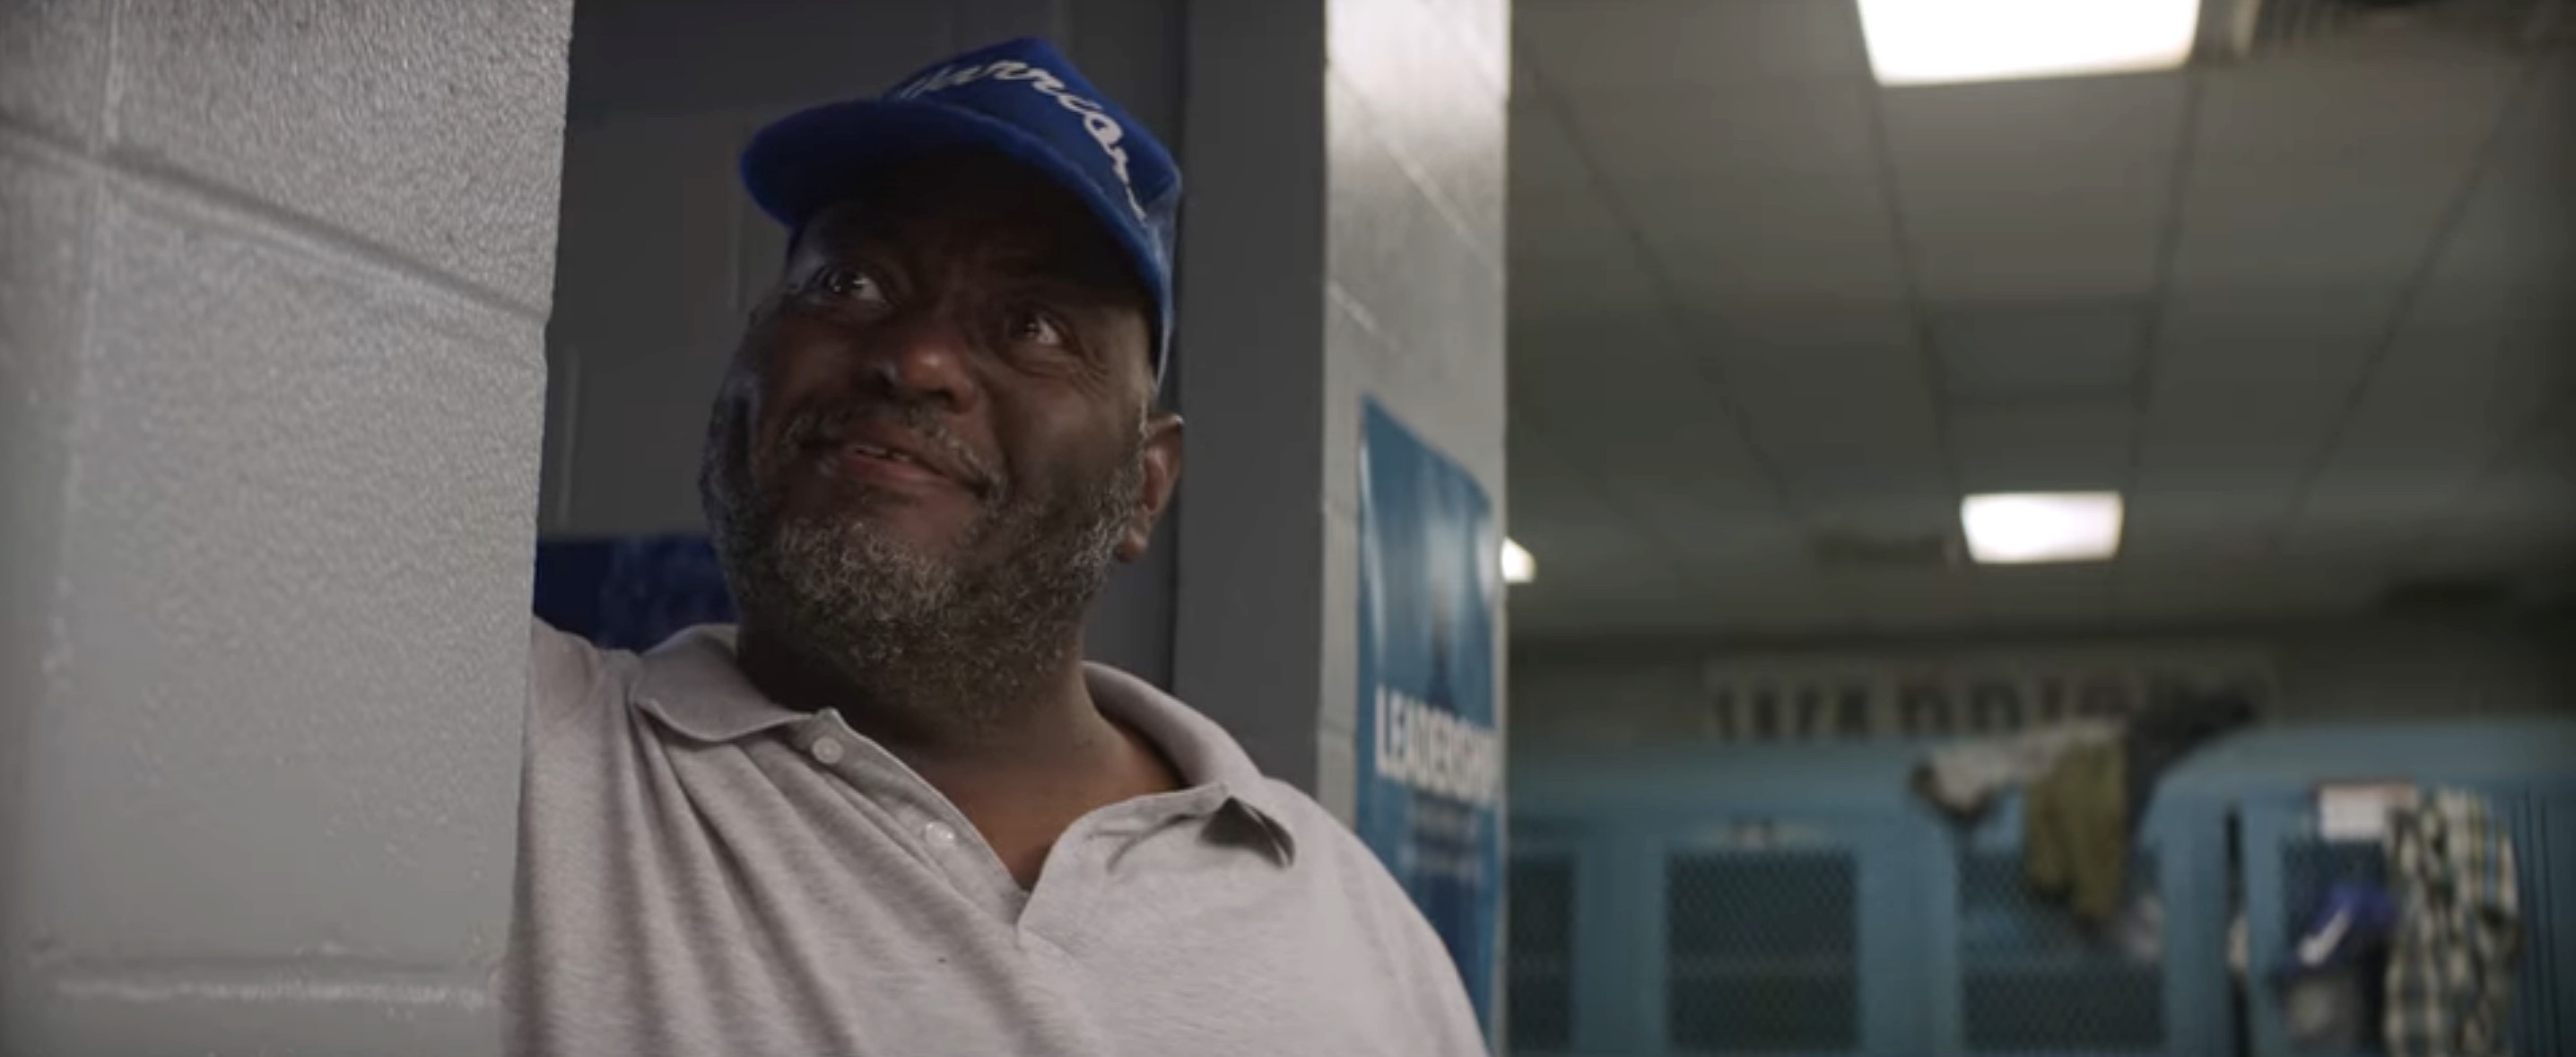 Home Team Cast - Lavell Crawford as Gus the Bus Driver